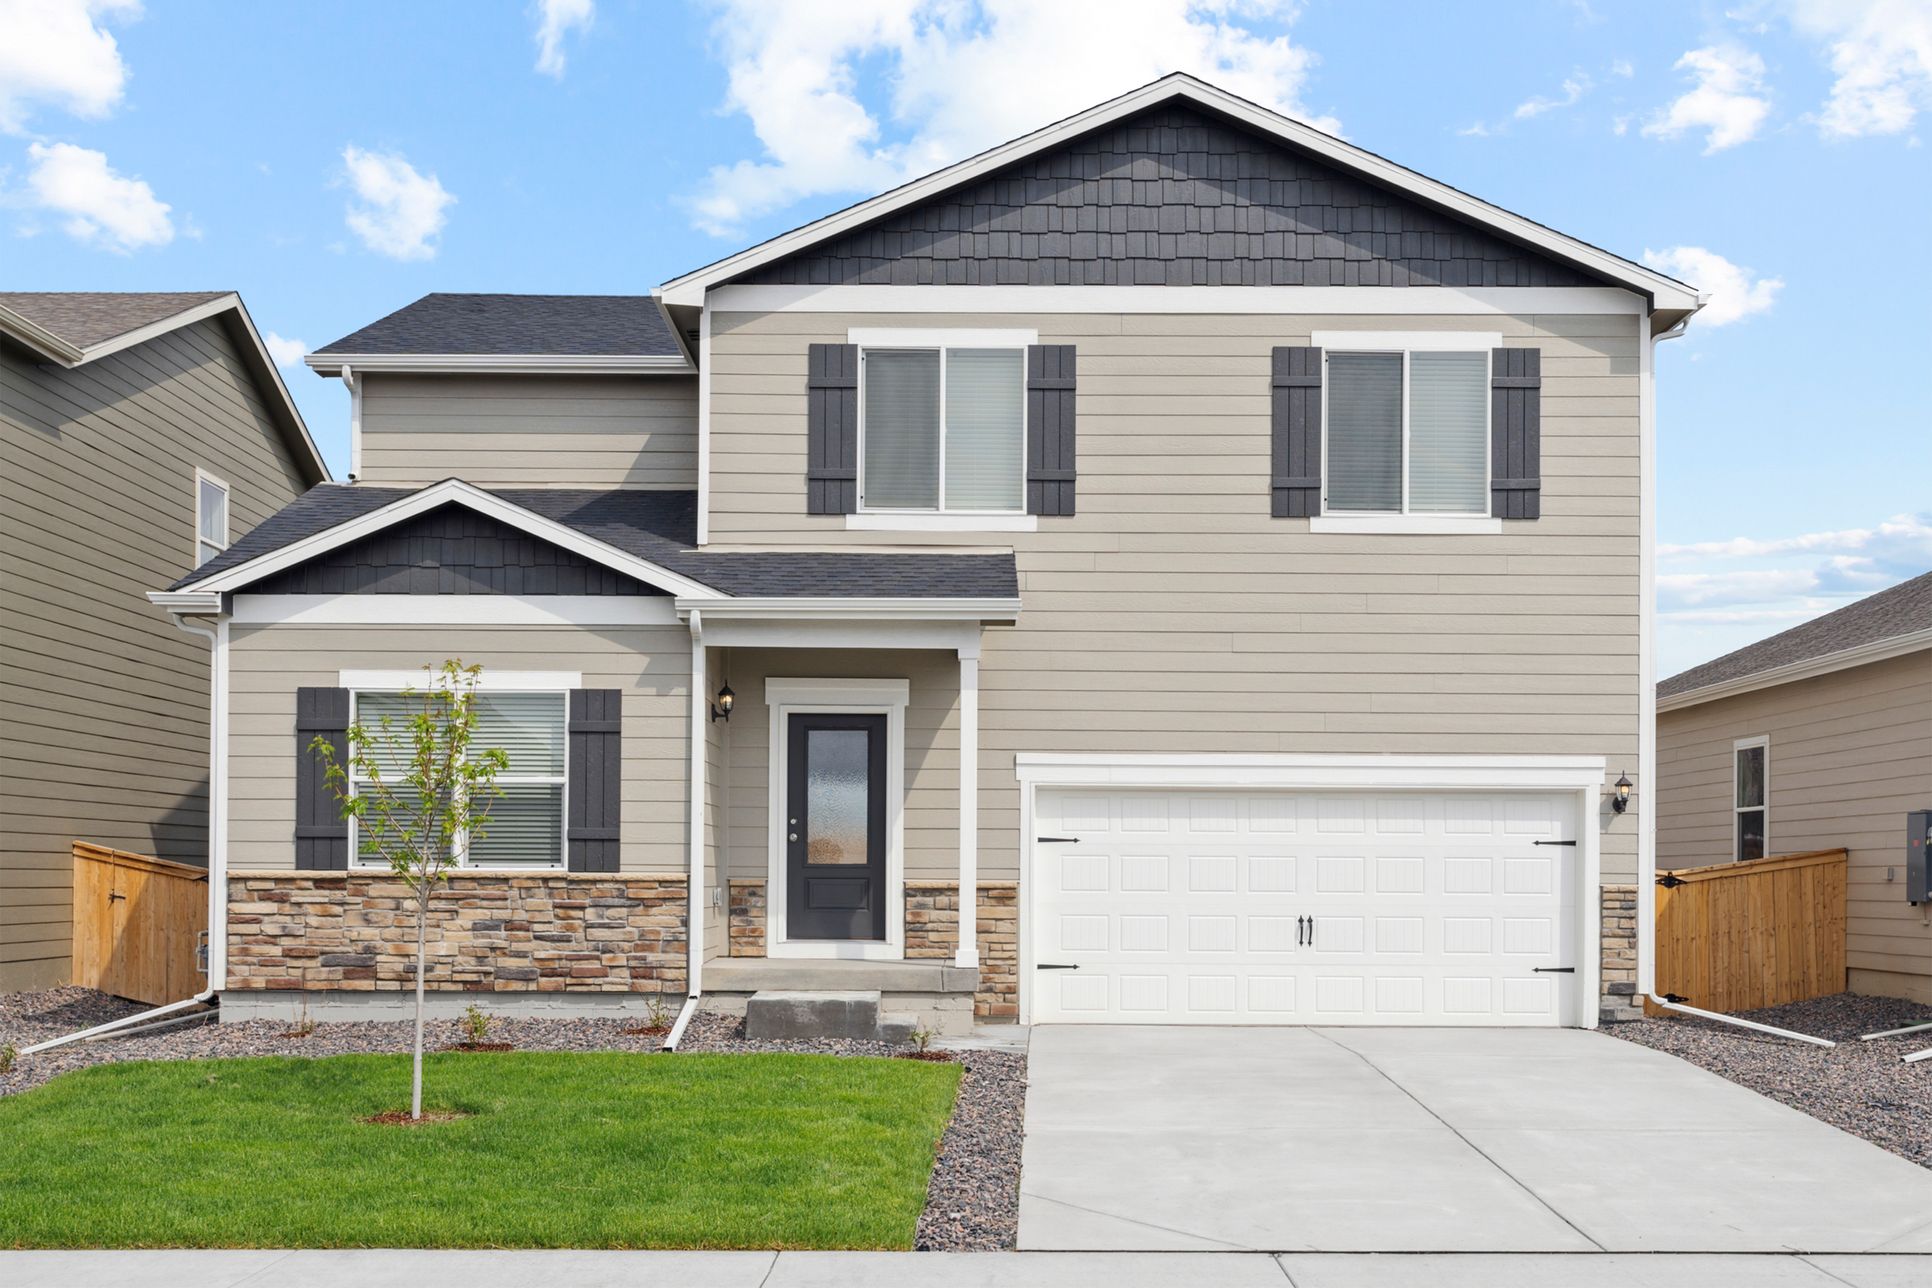 The Roosevelt by LGI Homes:The Roosevelt is a beautiful two-story home located in the wonderful Hidden Valley Farms neighborhood.